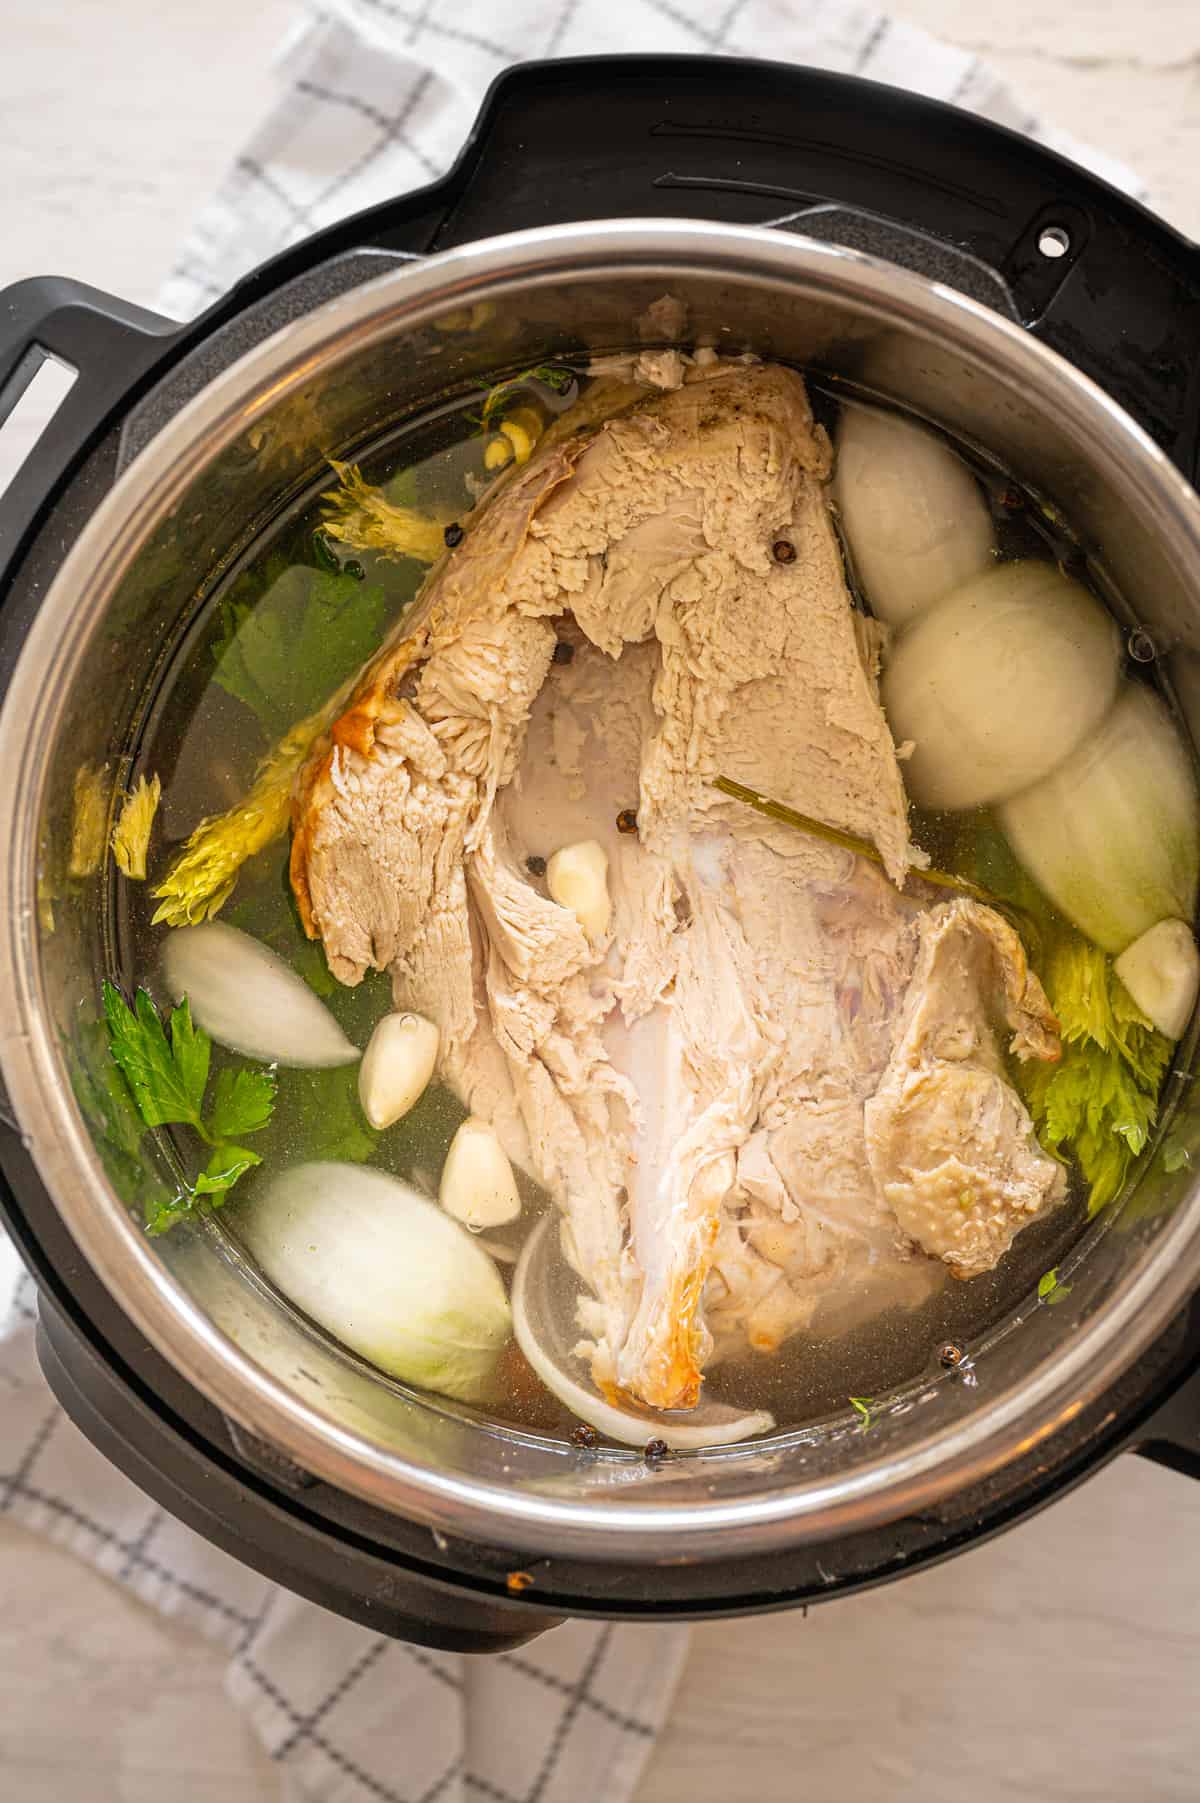 Instant Pot with turkey breast carcass, onions, carrots, celery, garlic cloves, peppercorns, and water to make turkey broth.